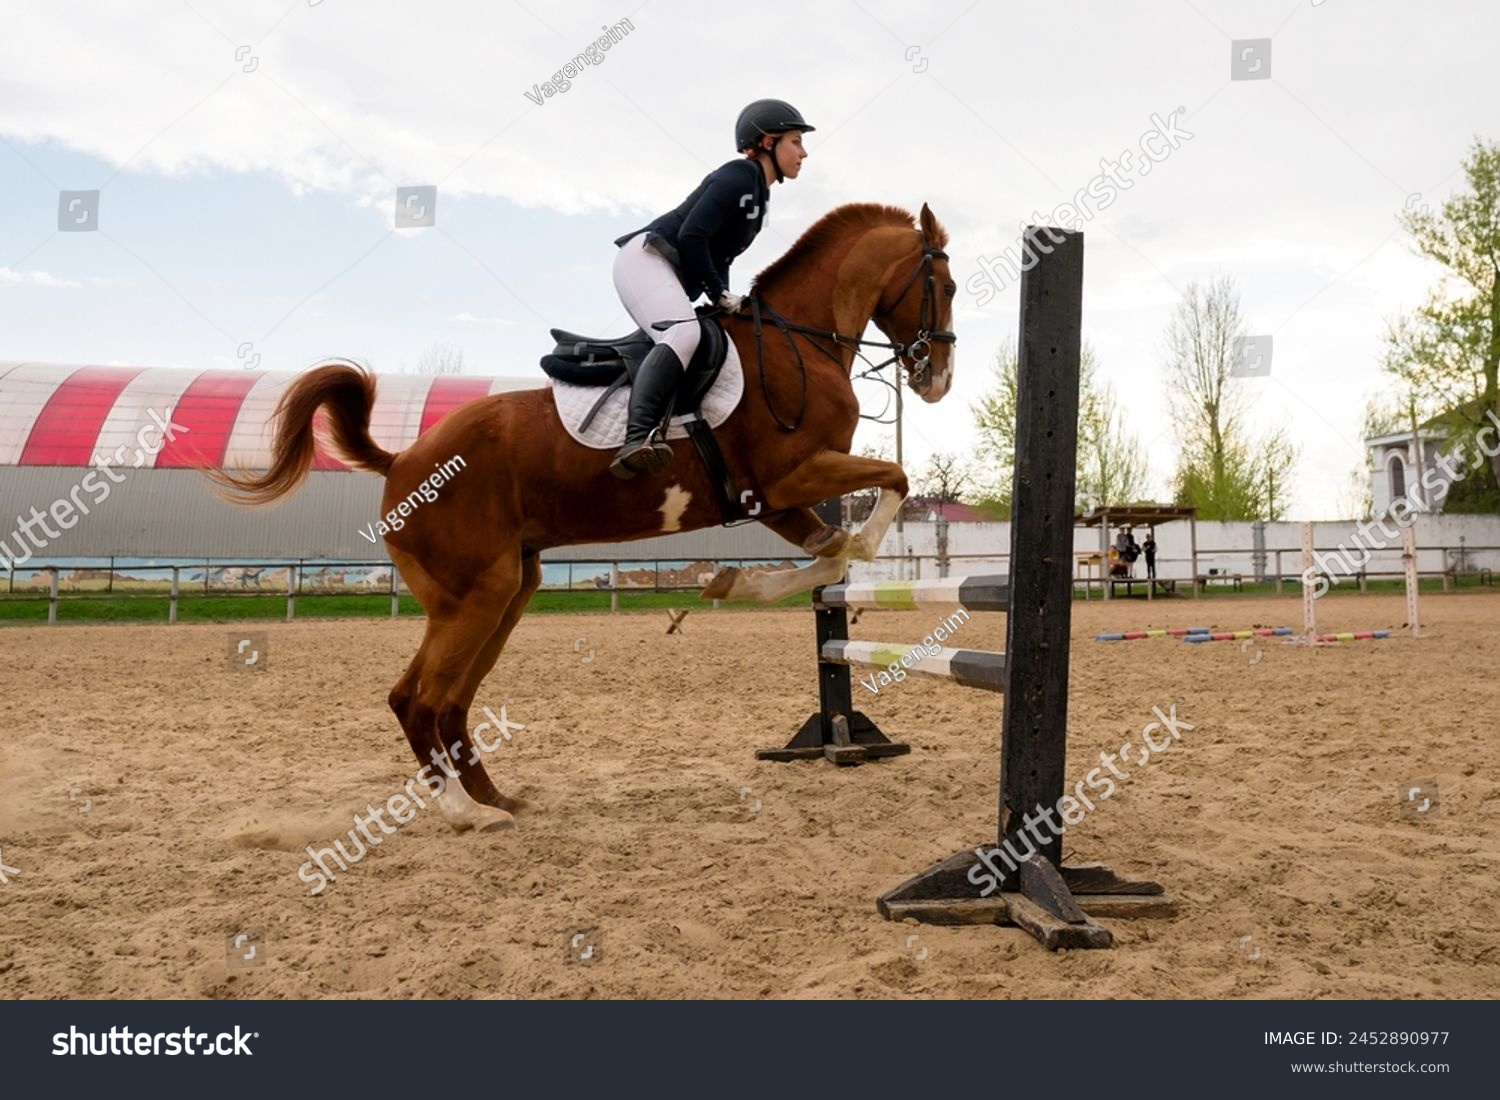 Equestrian and horse mid-jump, show jumping action. Practice session. Female jockey in uniform. Equestrian sport. Horseback riding school #2452890977